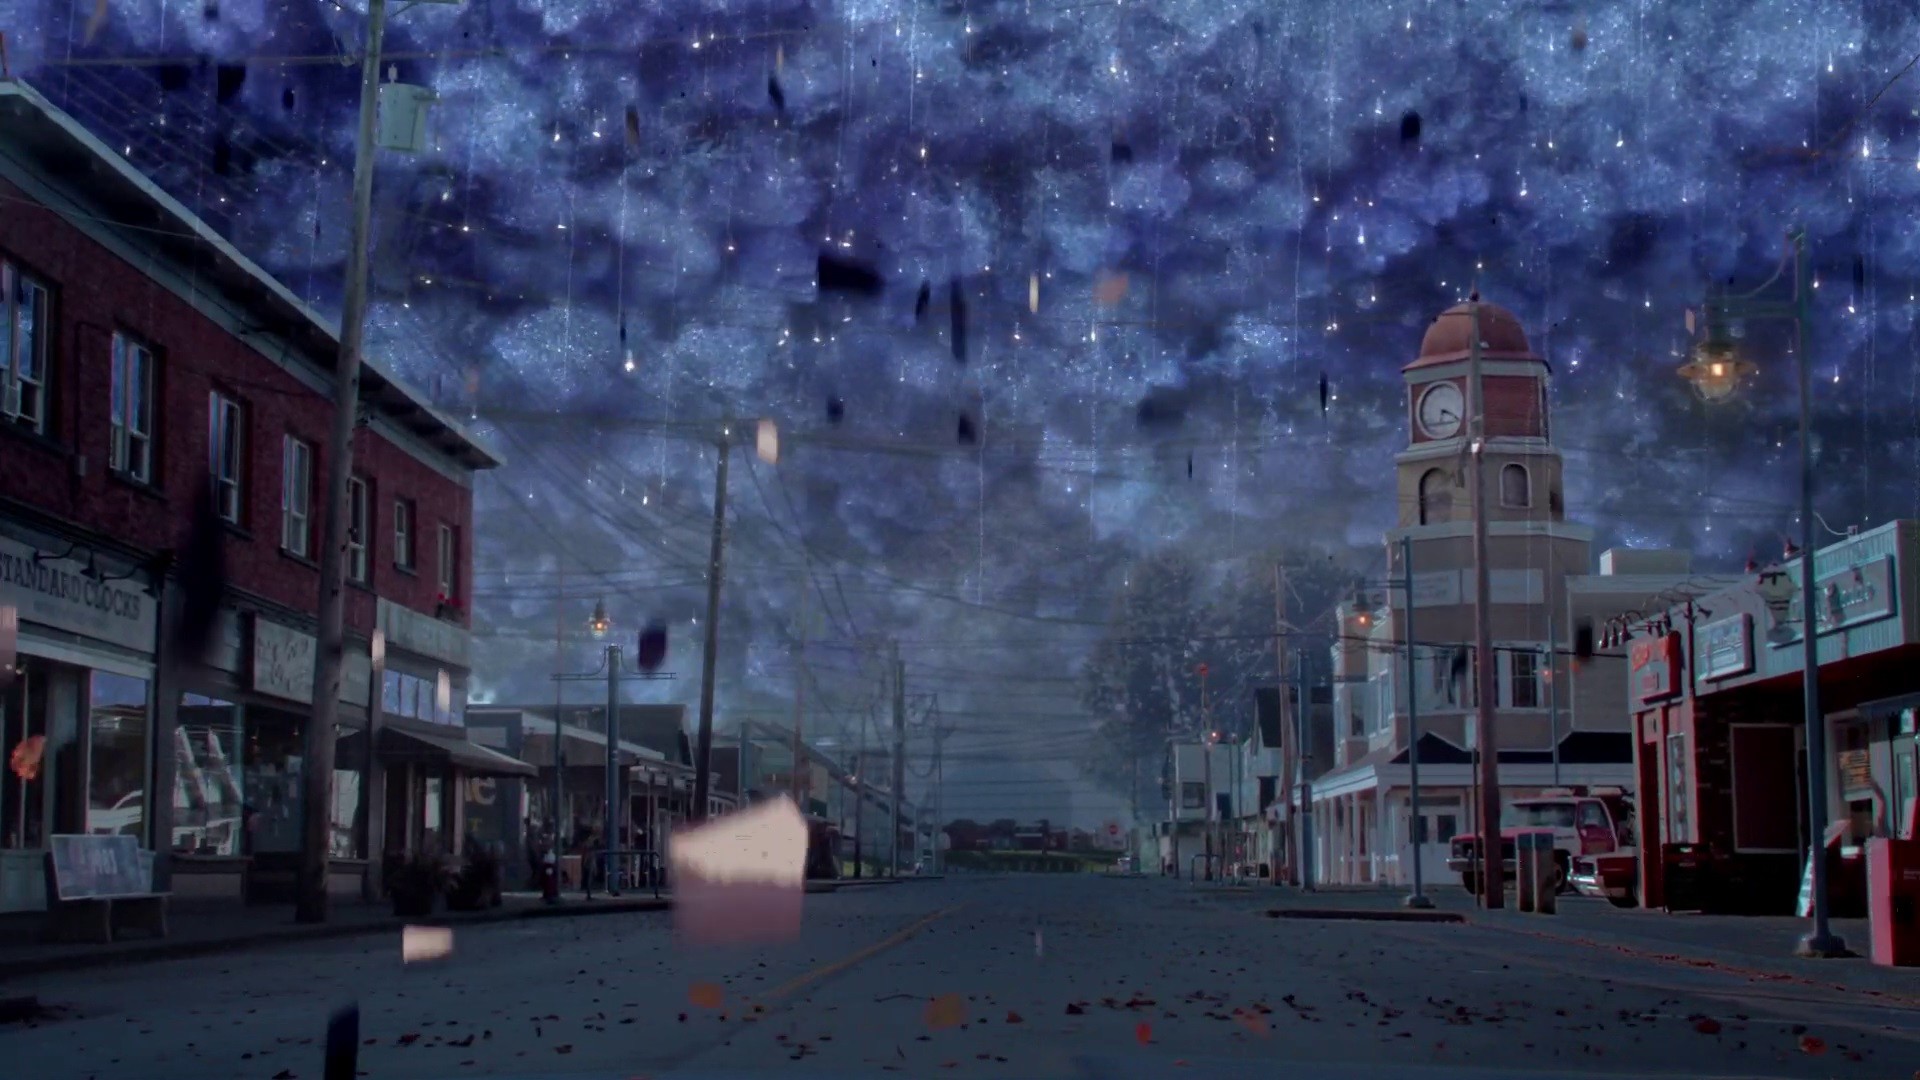 1920x1080 Once Upon a Time podcast 4x09 Fall - Shattered Mirrors Falling Down the  streets(1